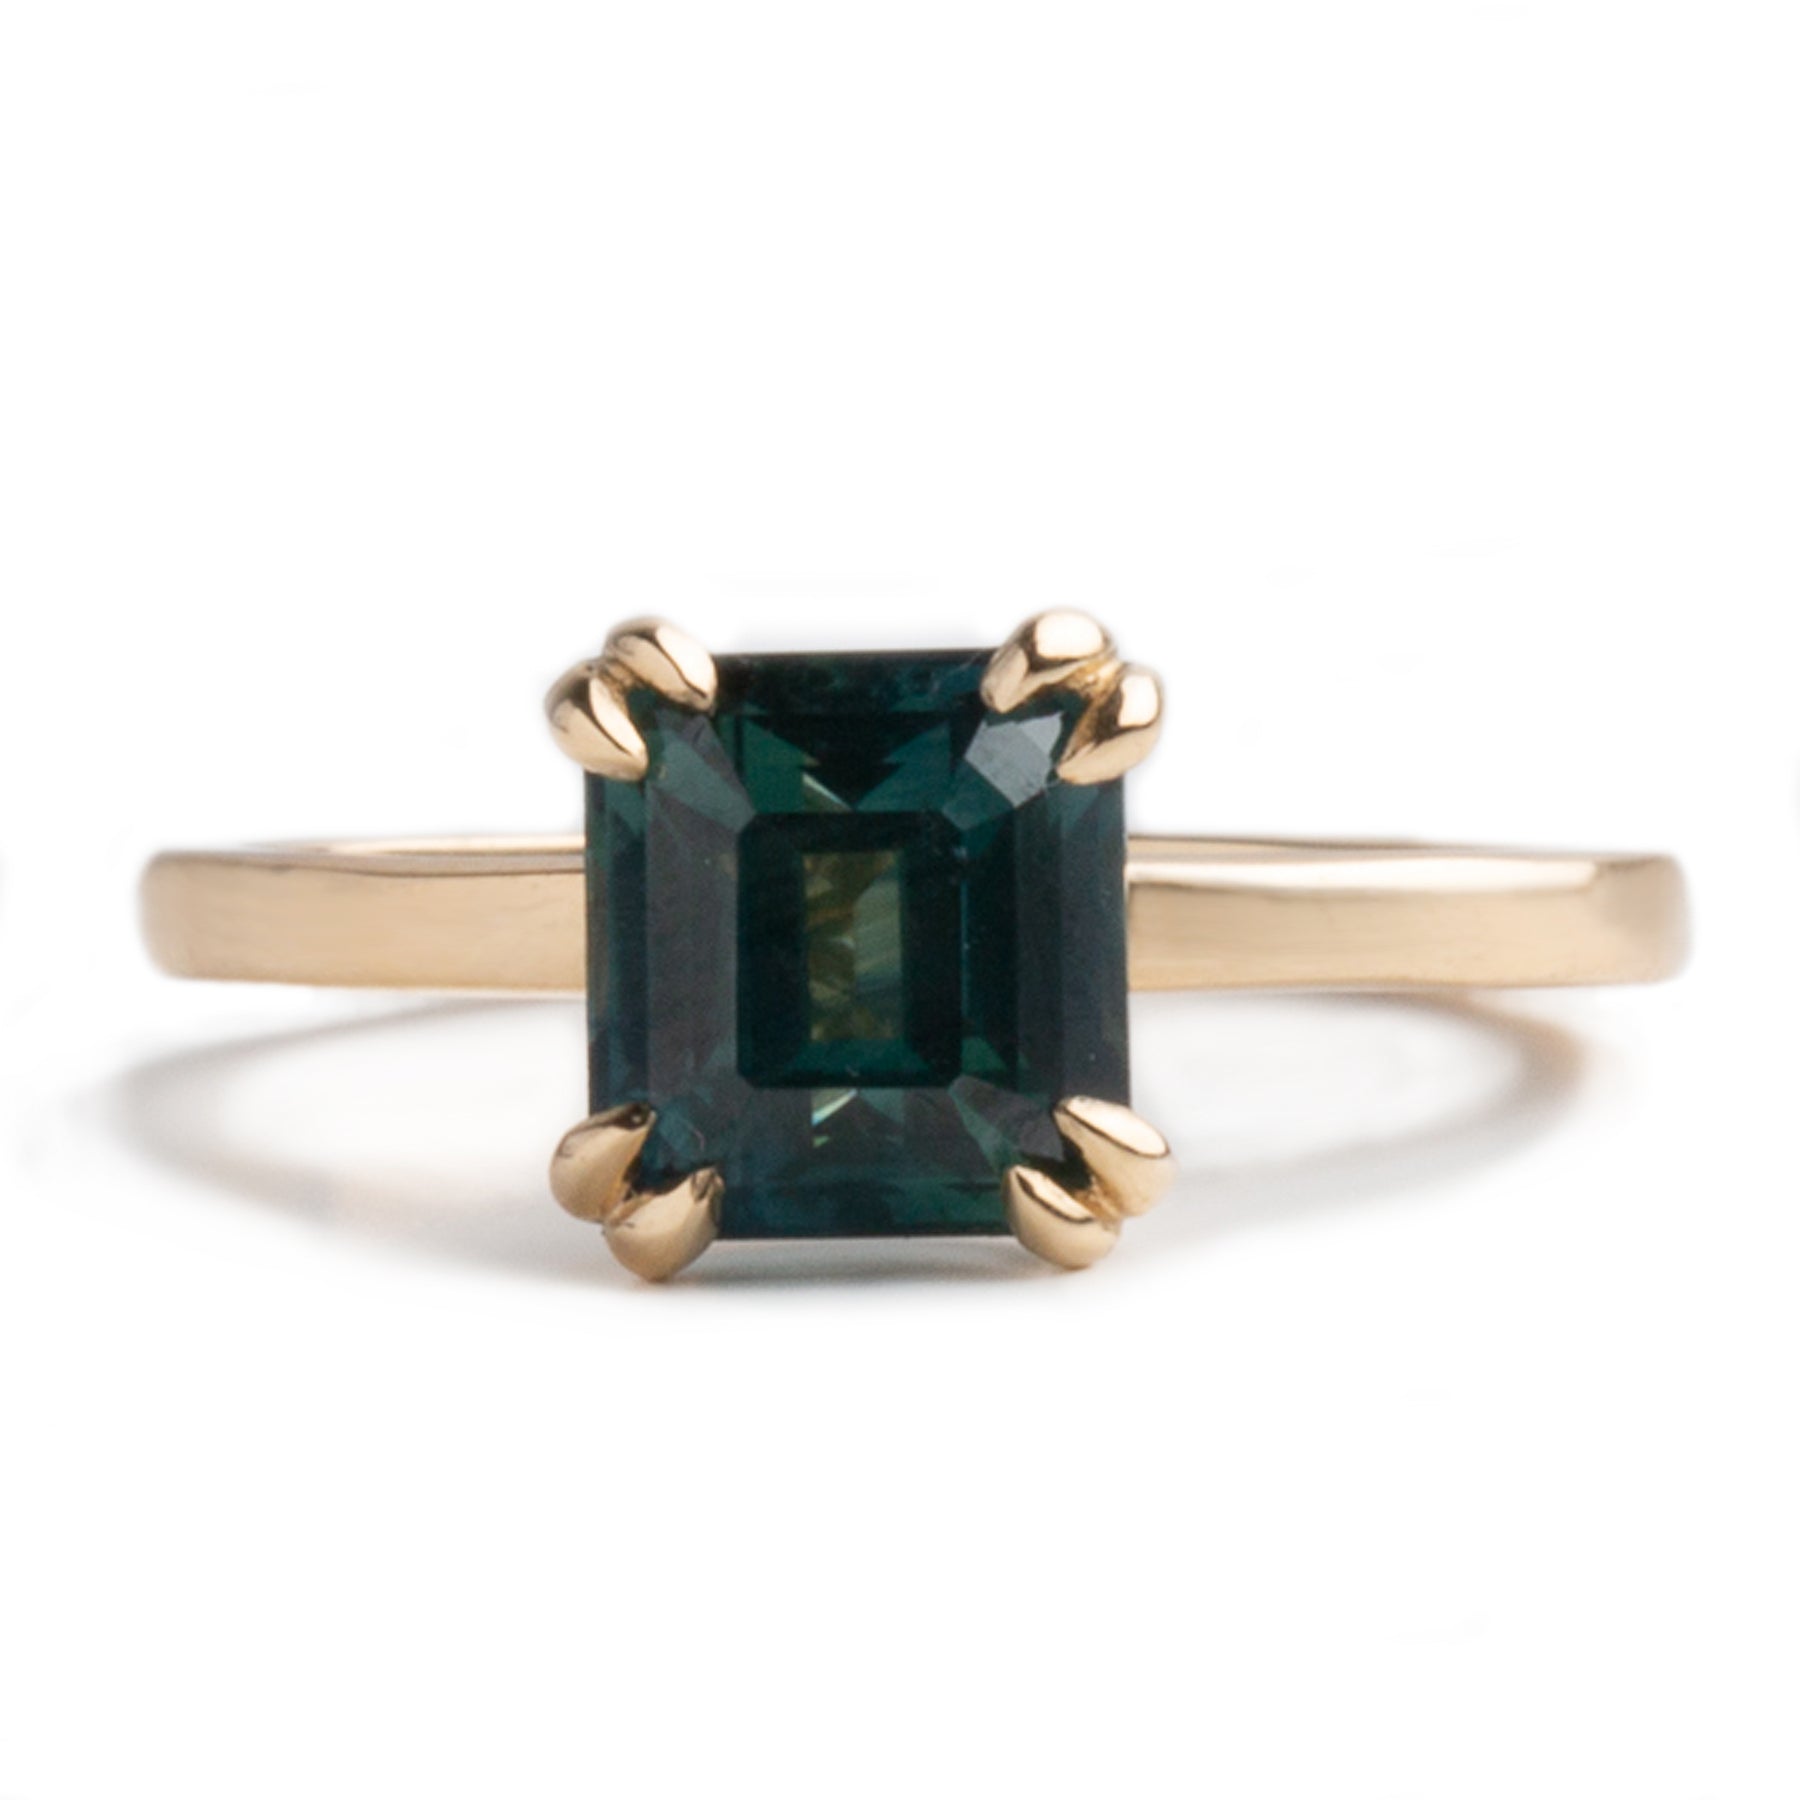 2.54ct emerald cut teal sapphire double prong 14k yellow gold solitaire engagement ring